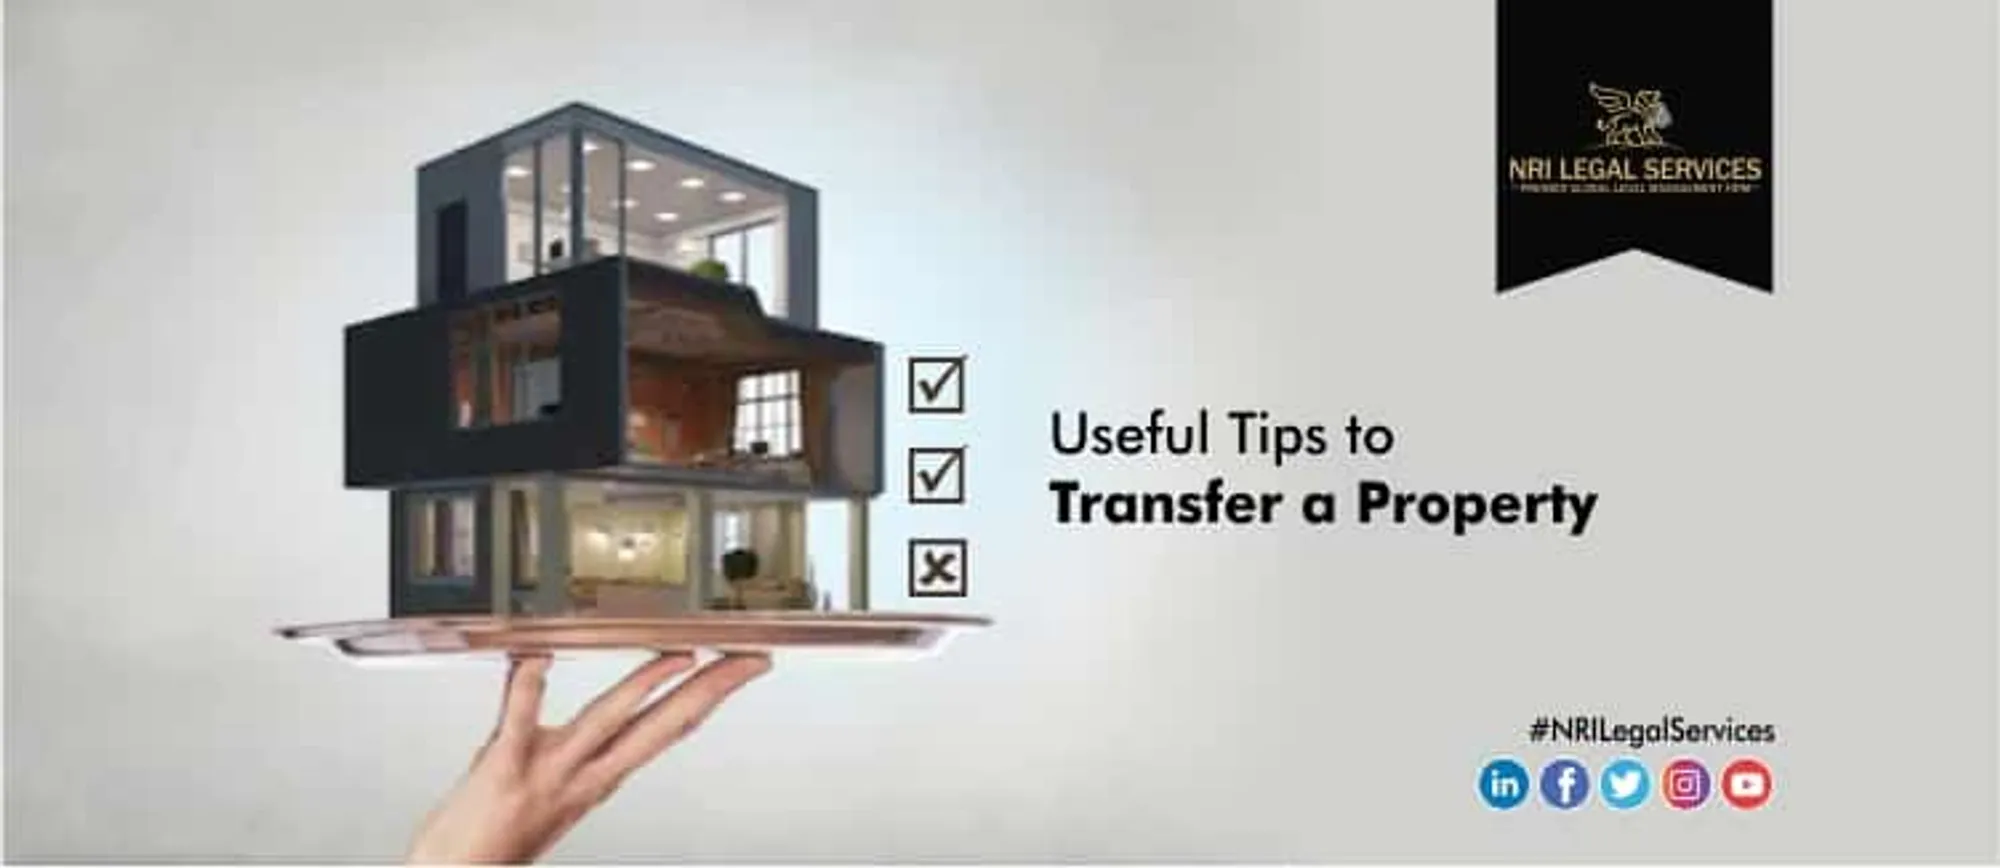 Useful Tips to Transfer a Property